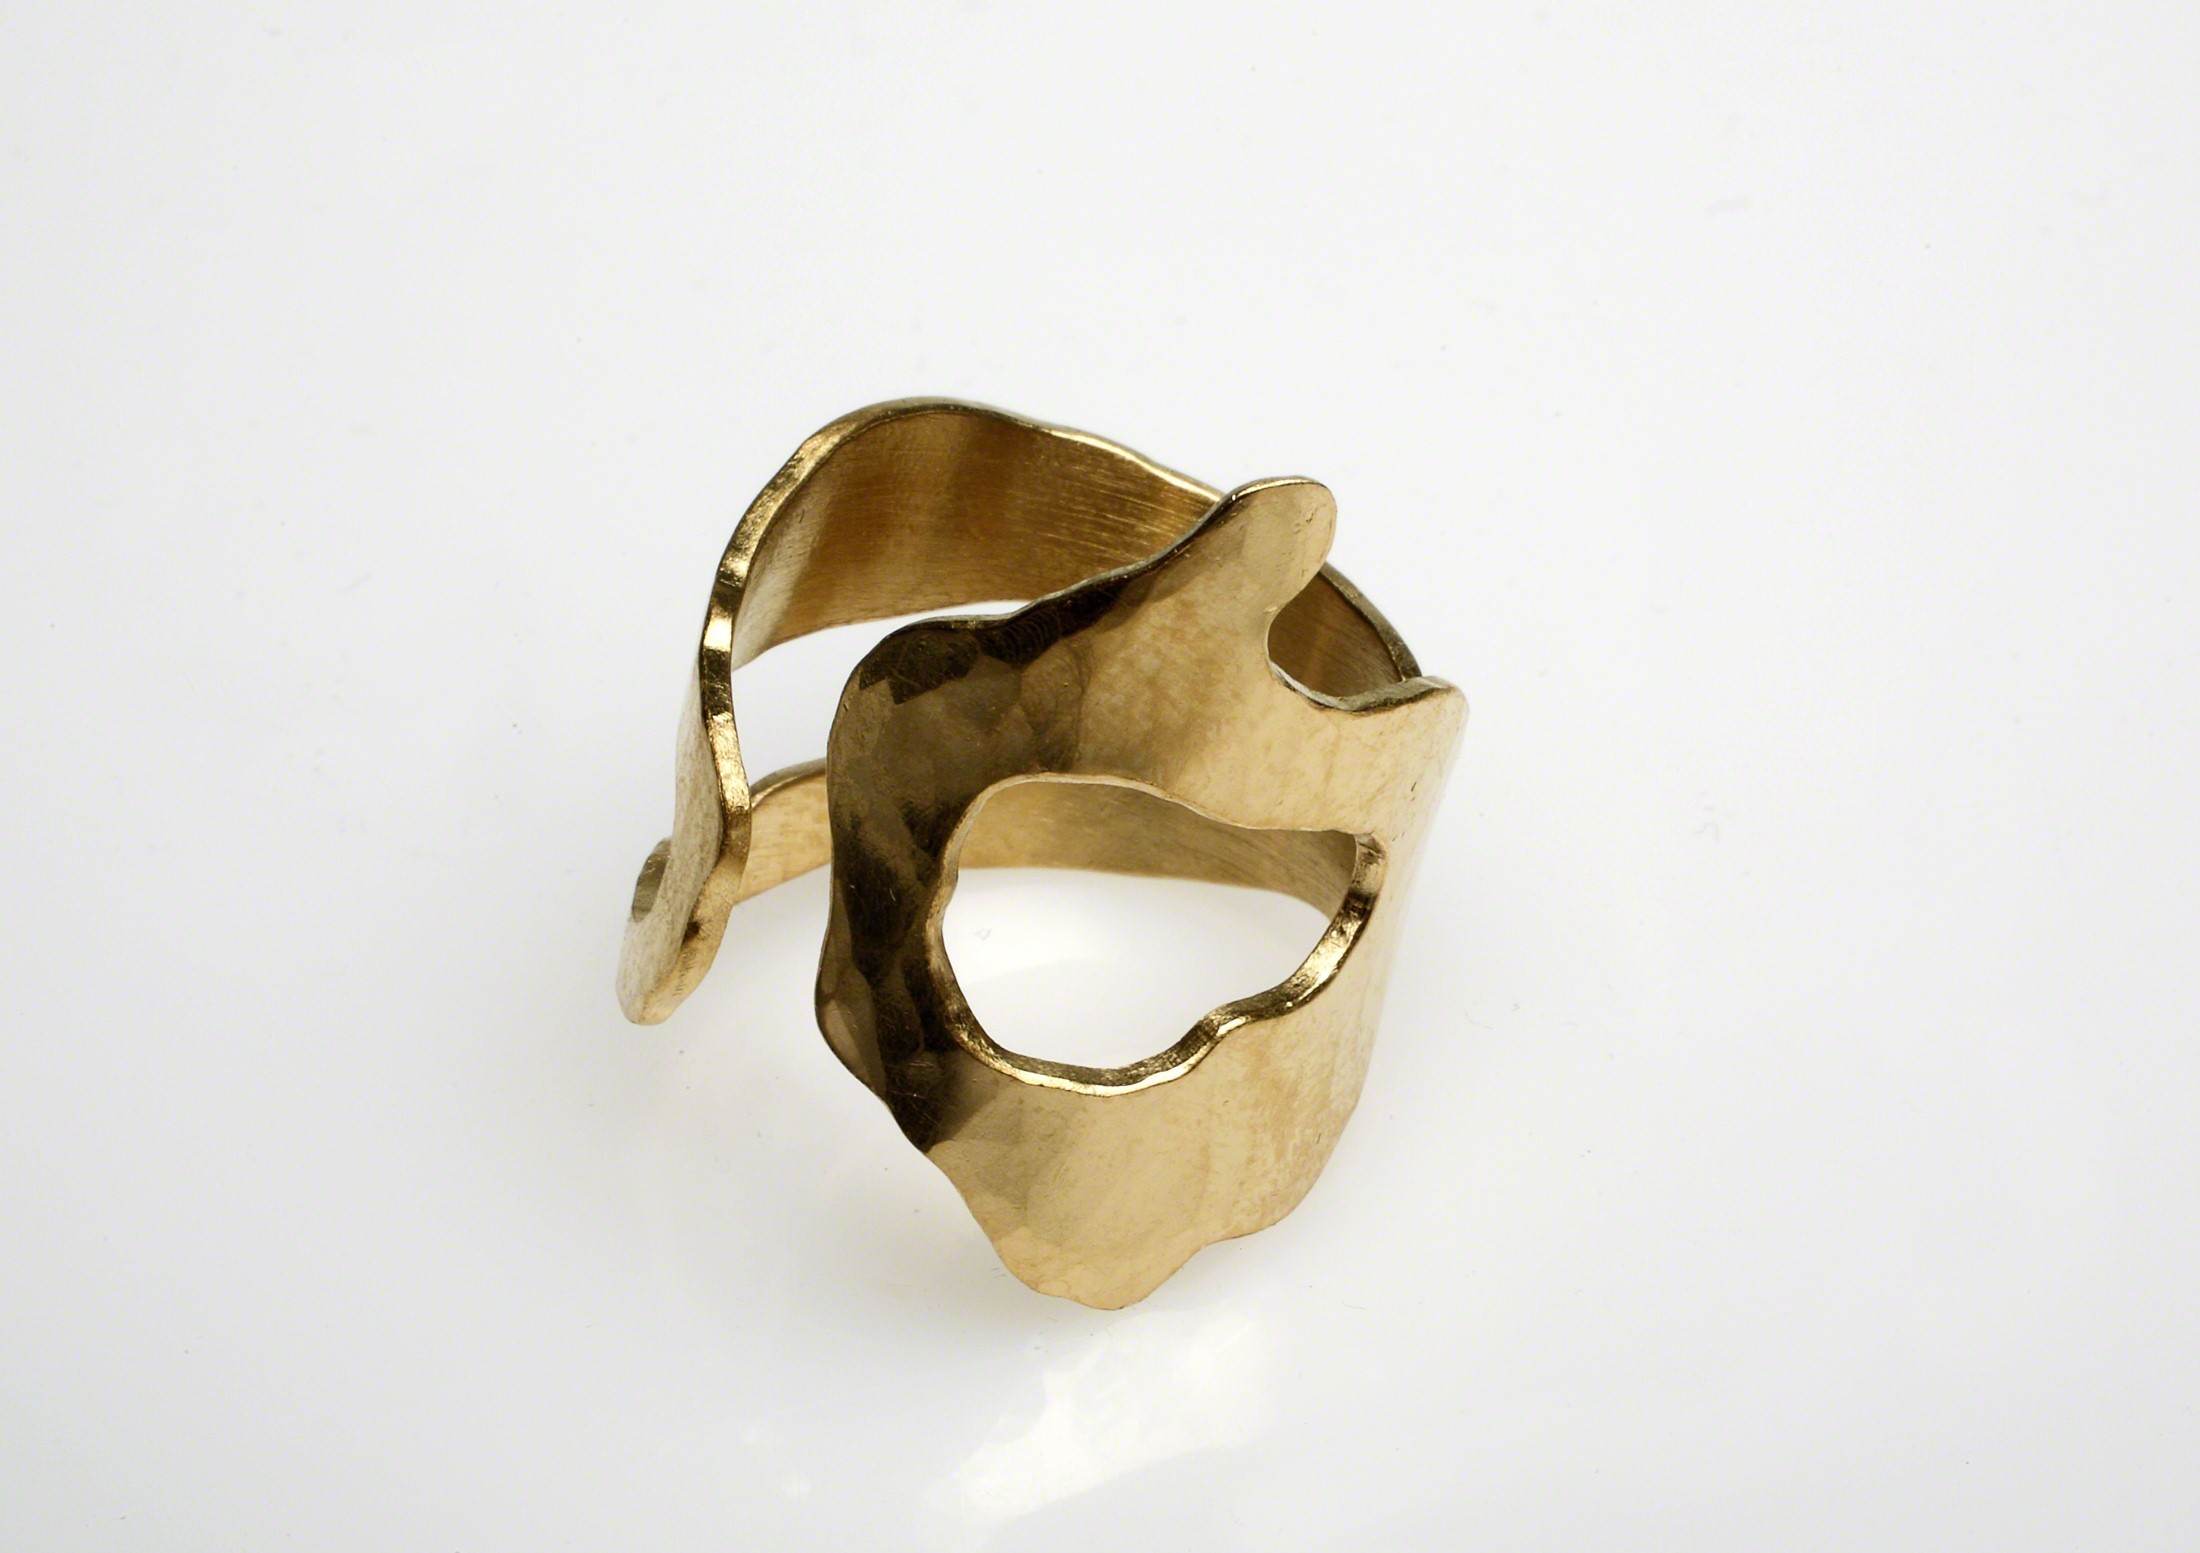 Ring "Eva" by Jacques Jarrige at the Valerie Goodman Gallery